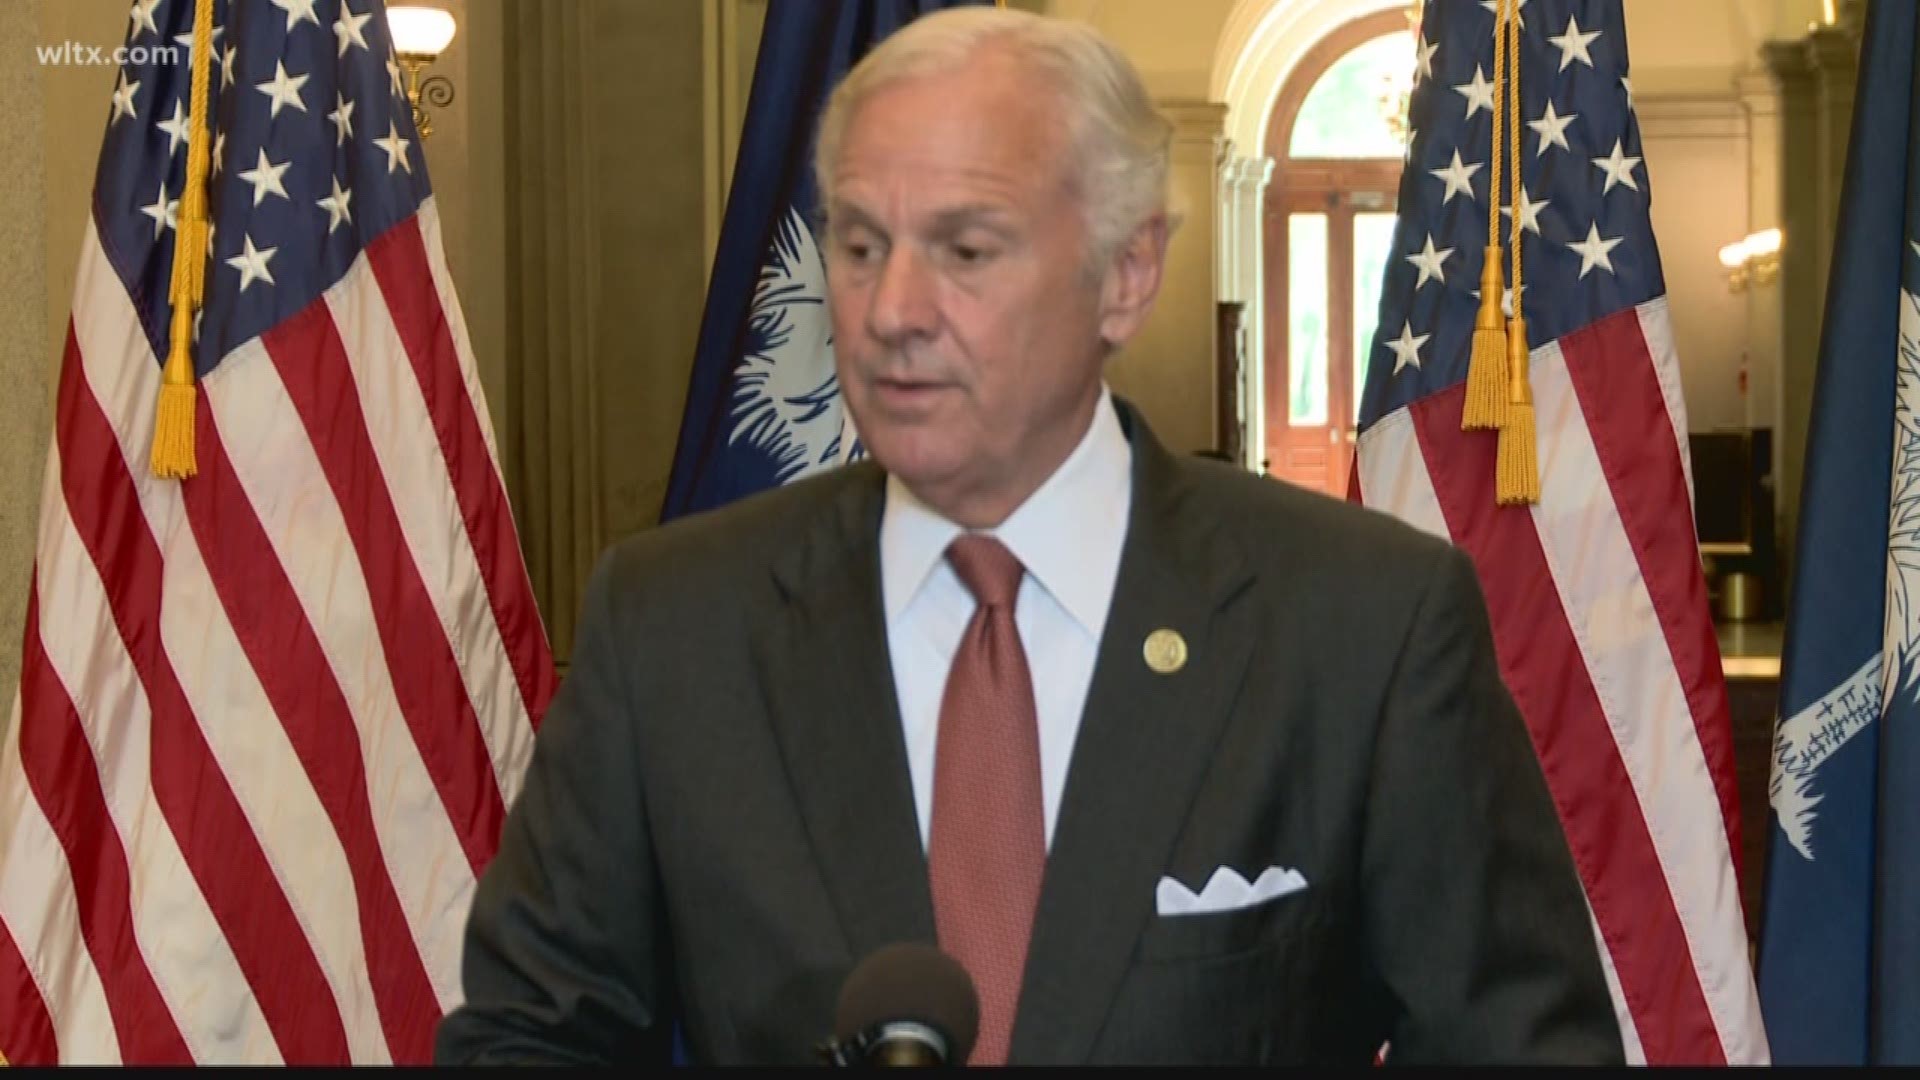 South Carolina Governor Henry McMaster vetoed some health care funding so that it couldn't go to Planned Parenthood, which he says was necessary to stop abortions.